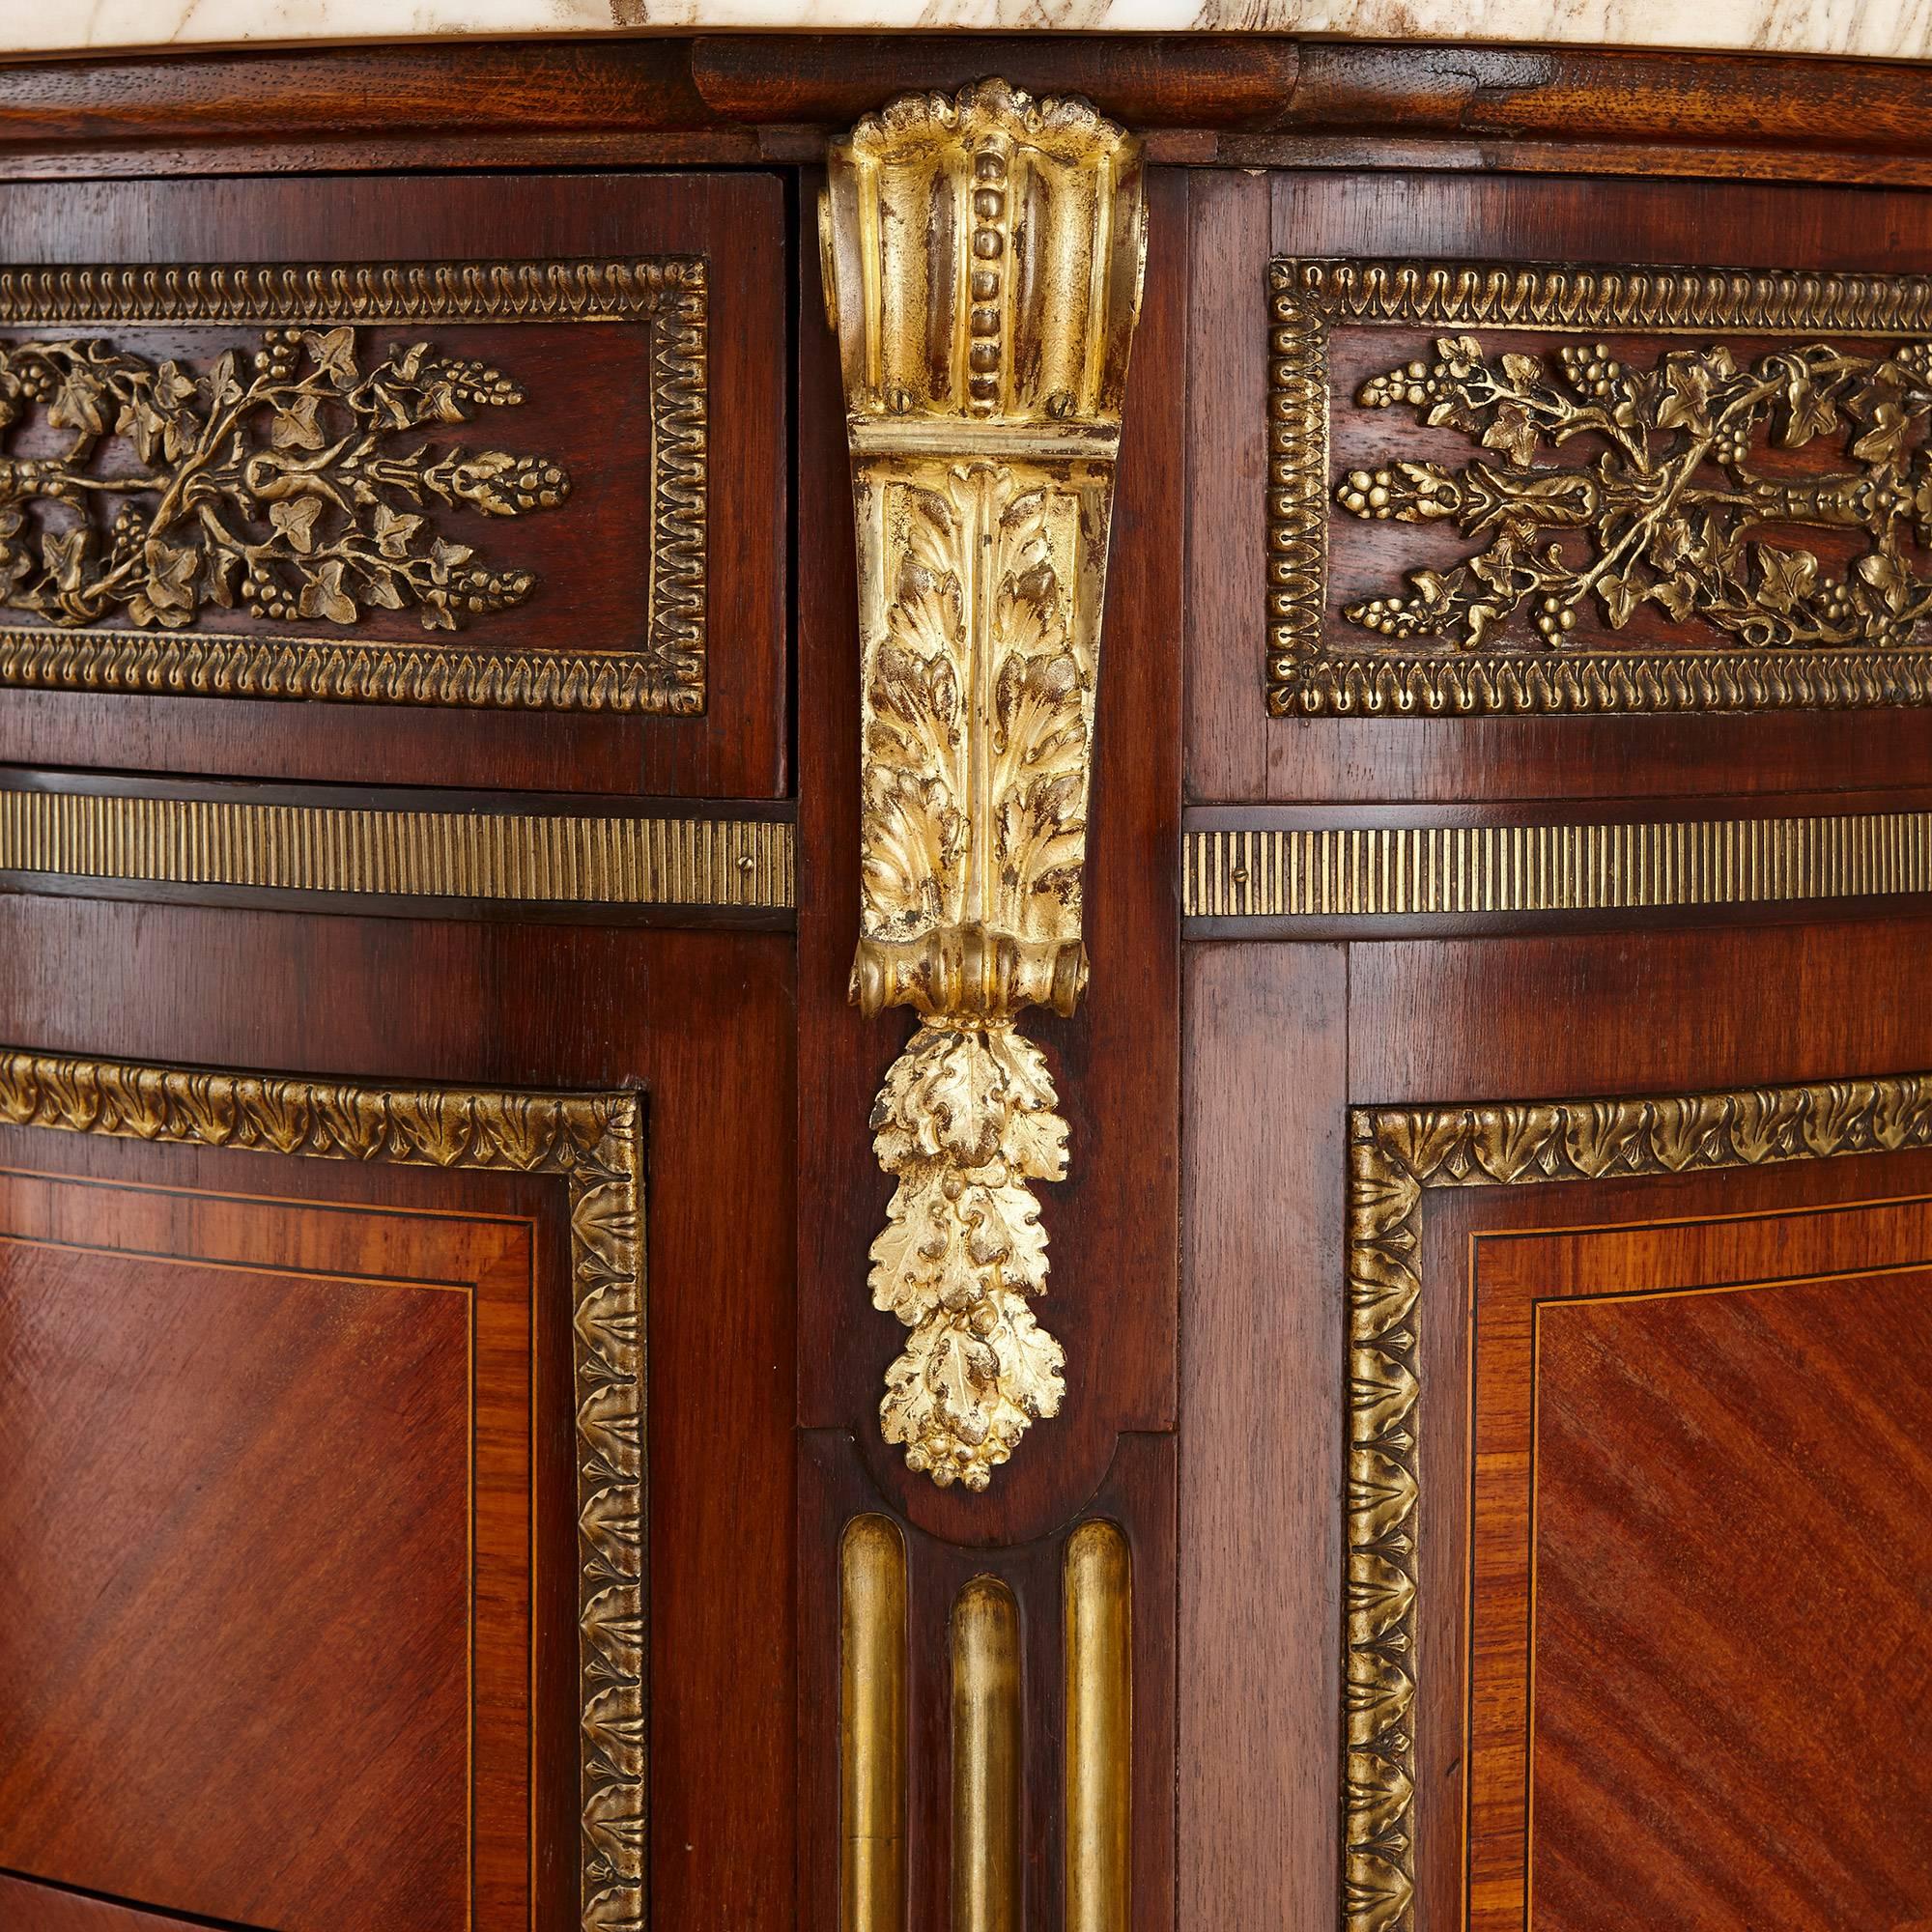 20th Century Neoclassical Style Marble and Ormolu-Mounted Wood Commode After Leleu For Sale